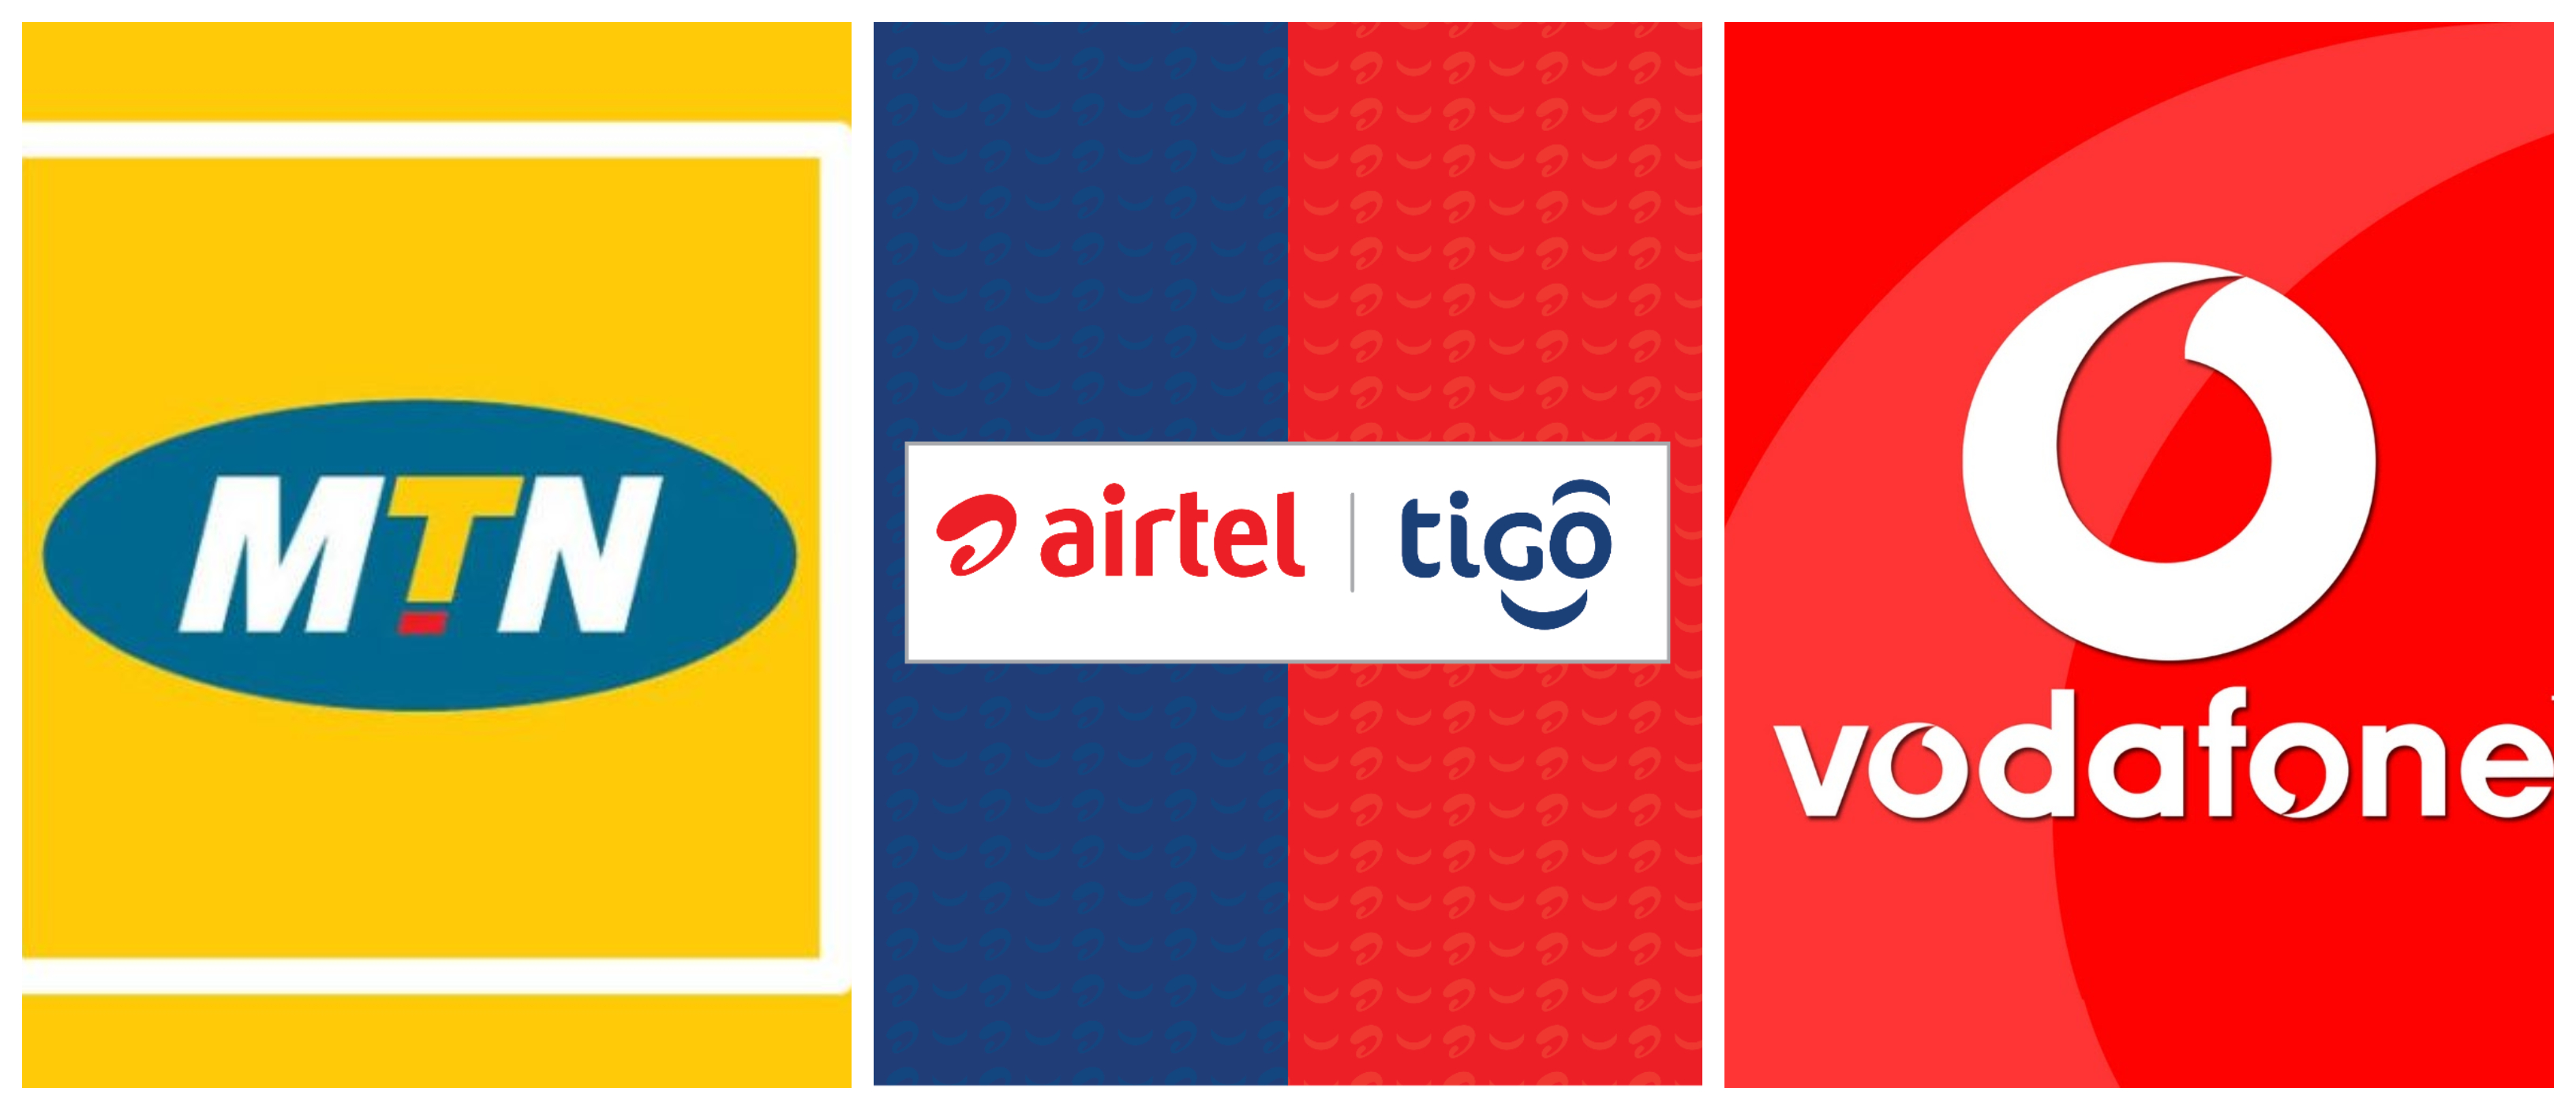 The three telcos have announced that they will increase their tariffs from November 1